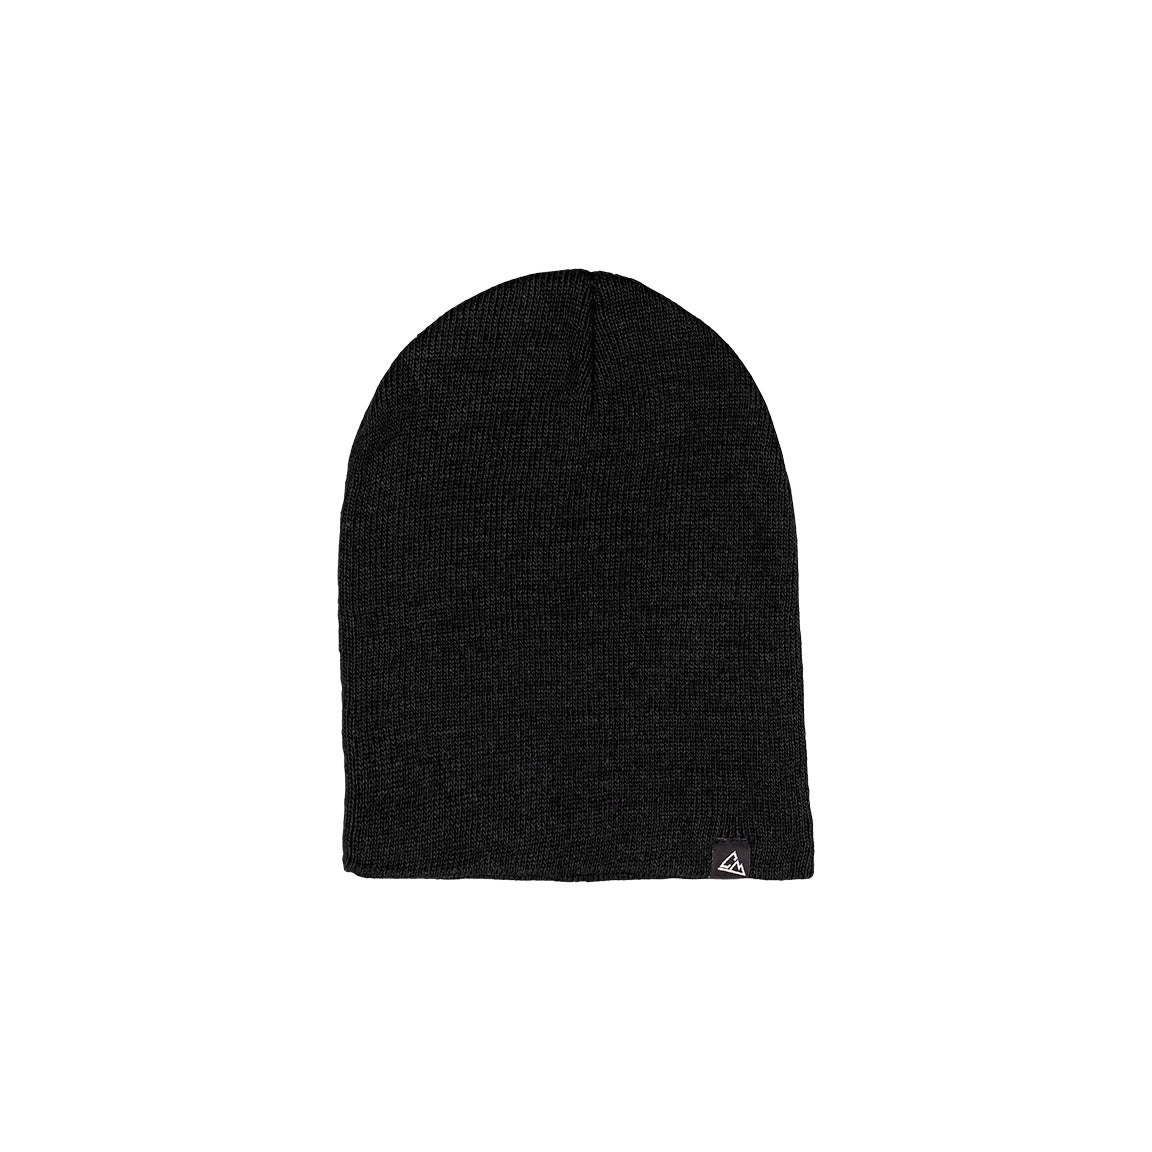 A plain black knitted beanie with a subtle weave pattern and a small triangular logo near the bottom edge.